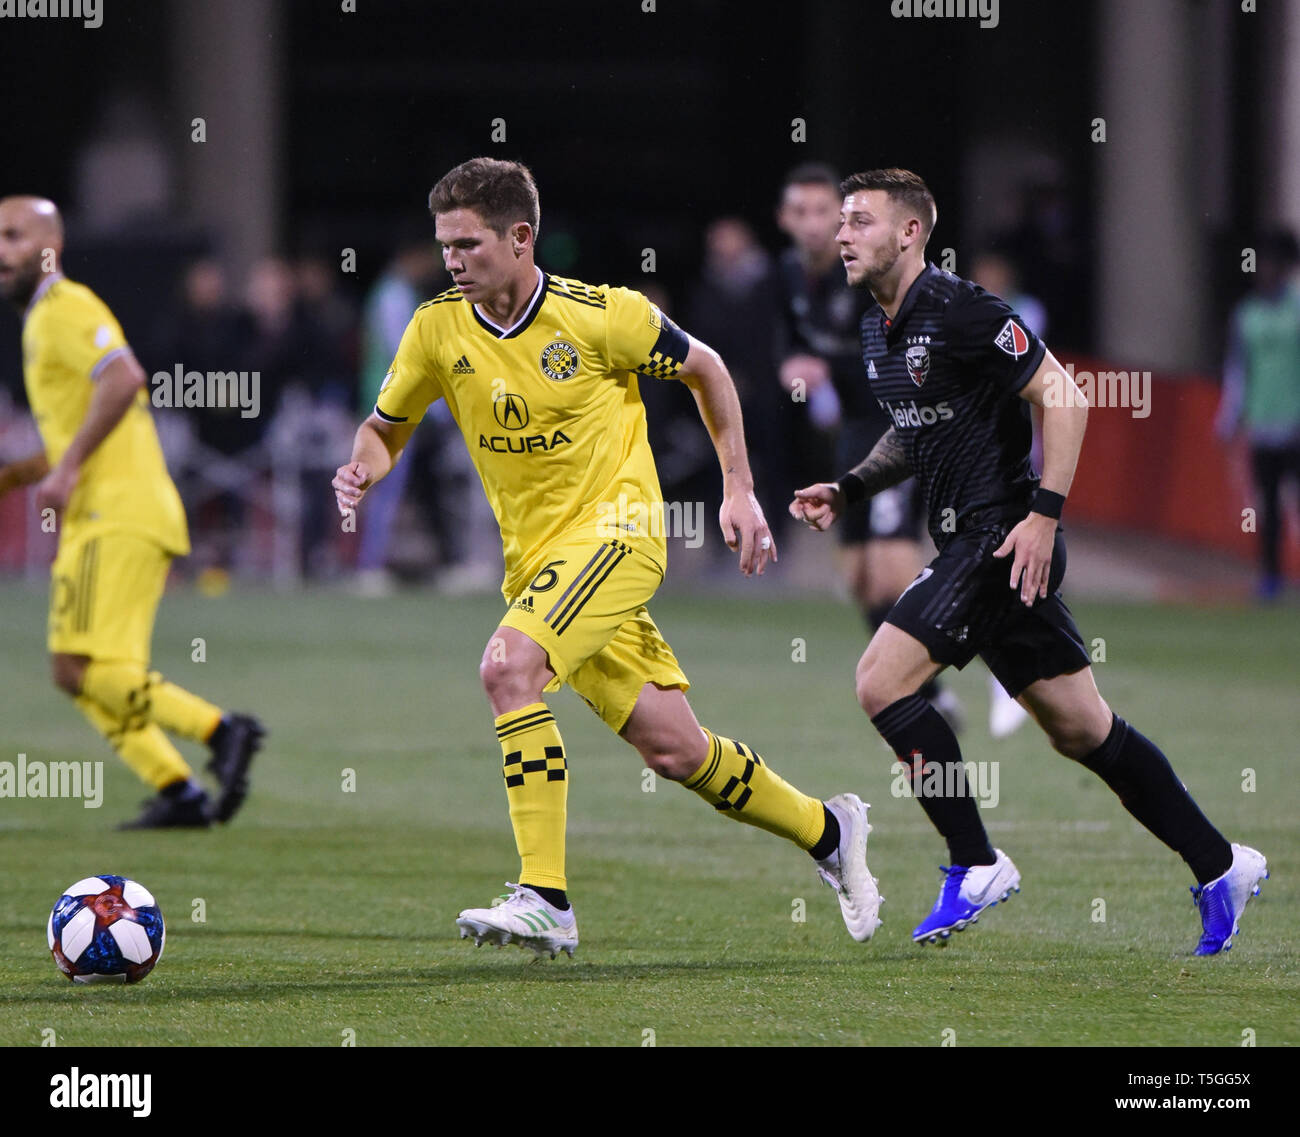 Columbus, OH, USA. 24th Apr, 2019. April 24, 2019: Columbus Crew midfielder Will Trapp (6) fields the ball during the MLS match between DC United and Columbus Crew SC at Mapfre Stadium in Columbus, Ohio. Austyn McFadden/ZUMA Credit: Austyn McFadden/ZUMA Wire/Alamy Live News Stock Photo